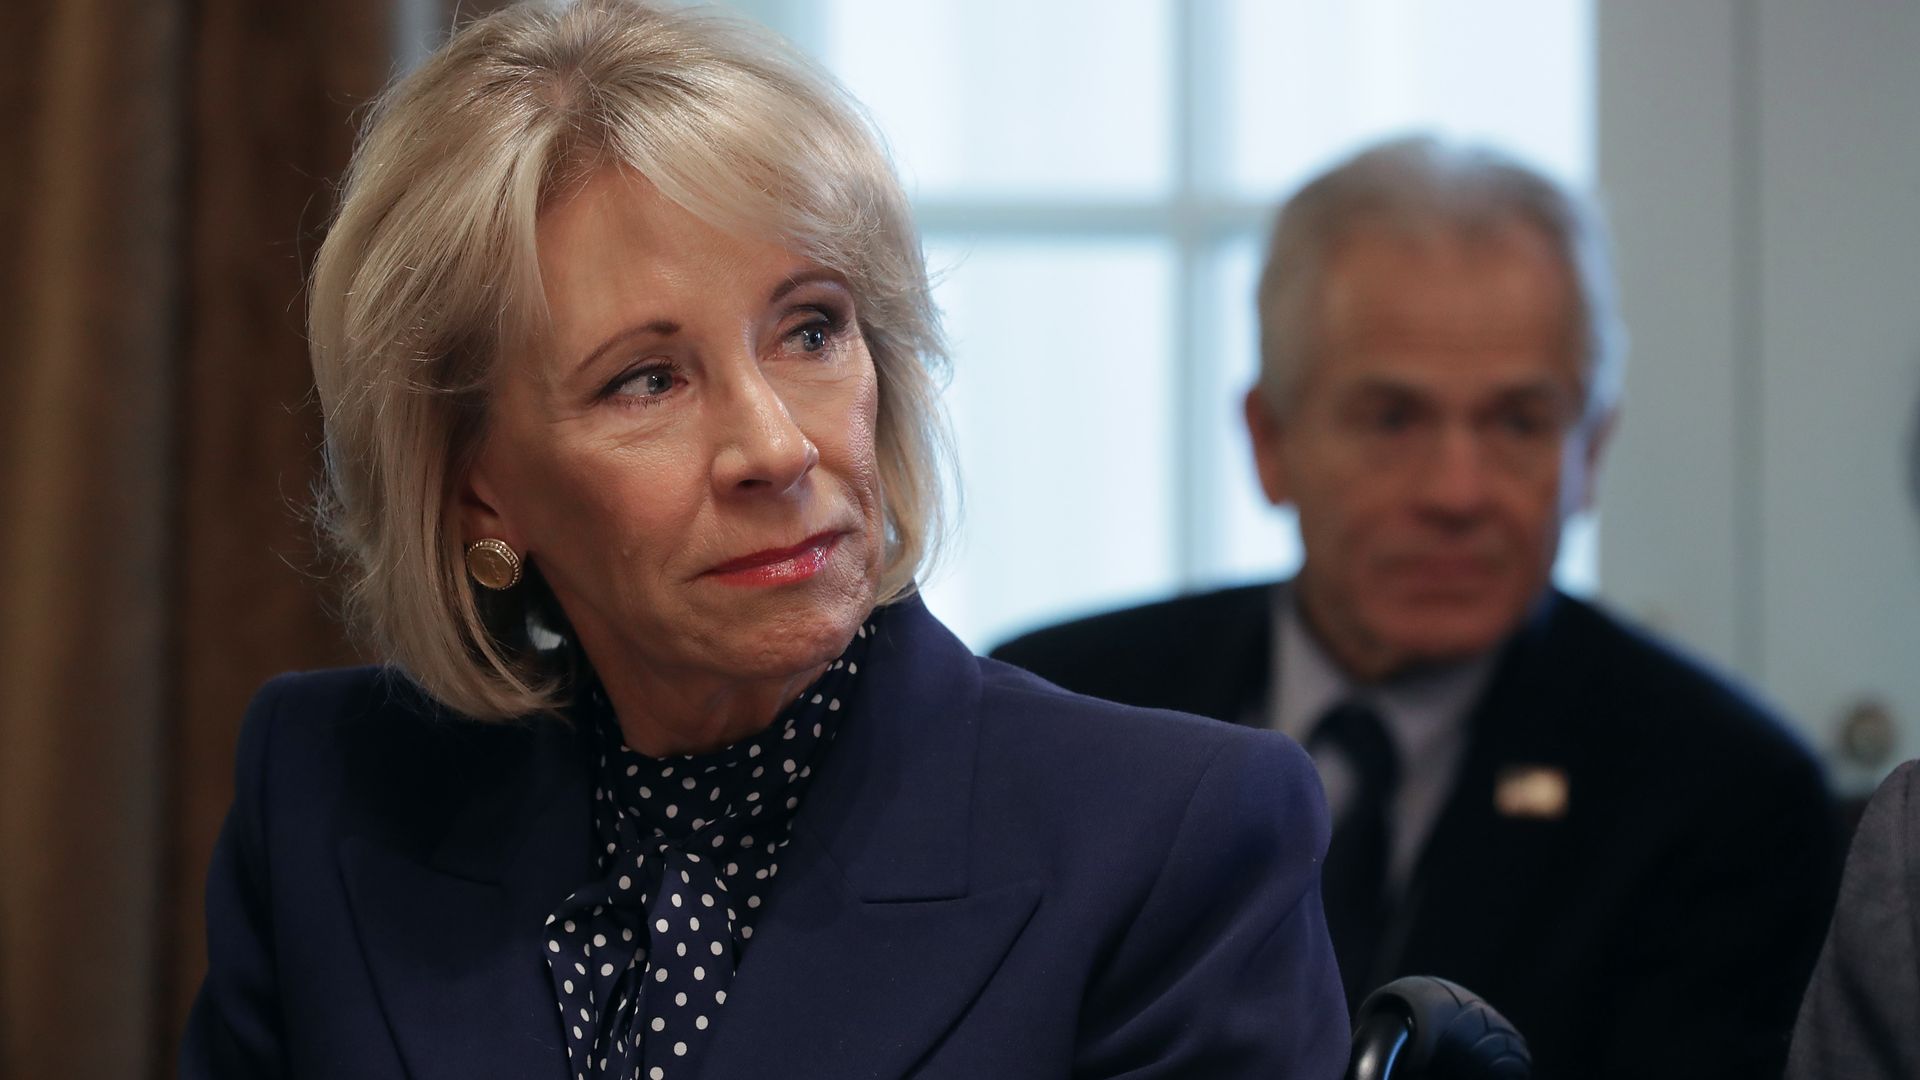 Education Secretary Betsy DeVos sits in a blue suit in a cabinet meeting.